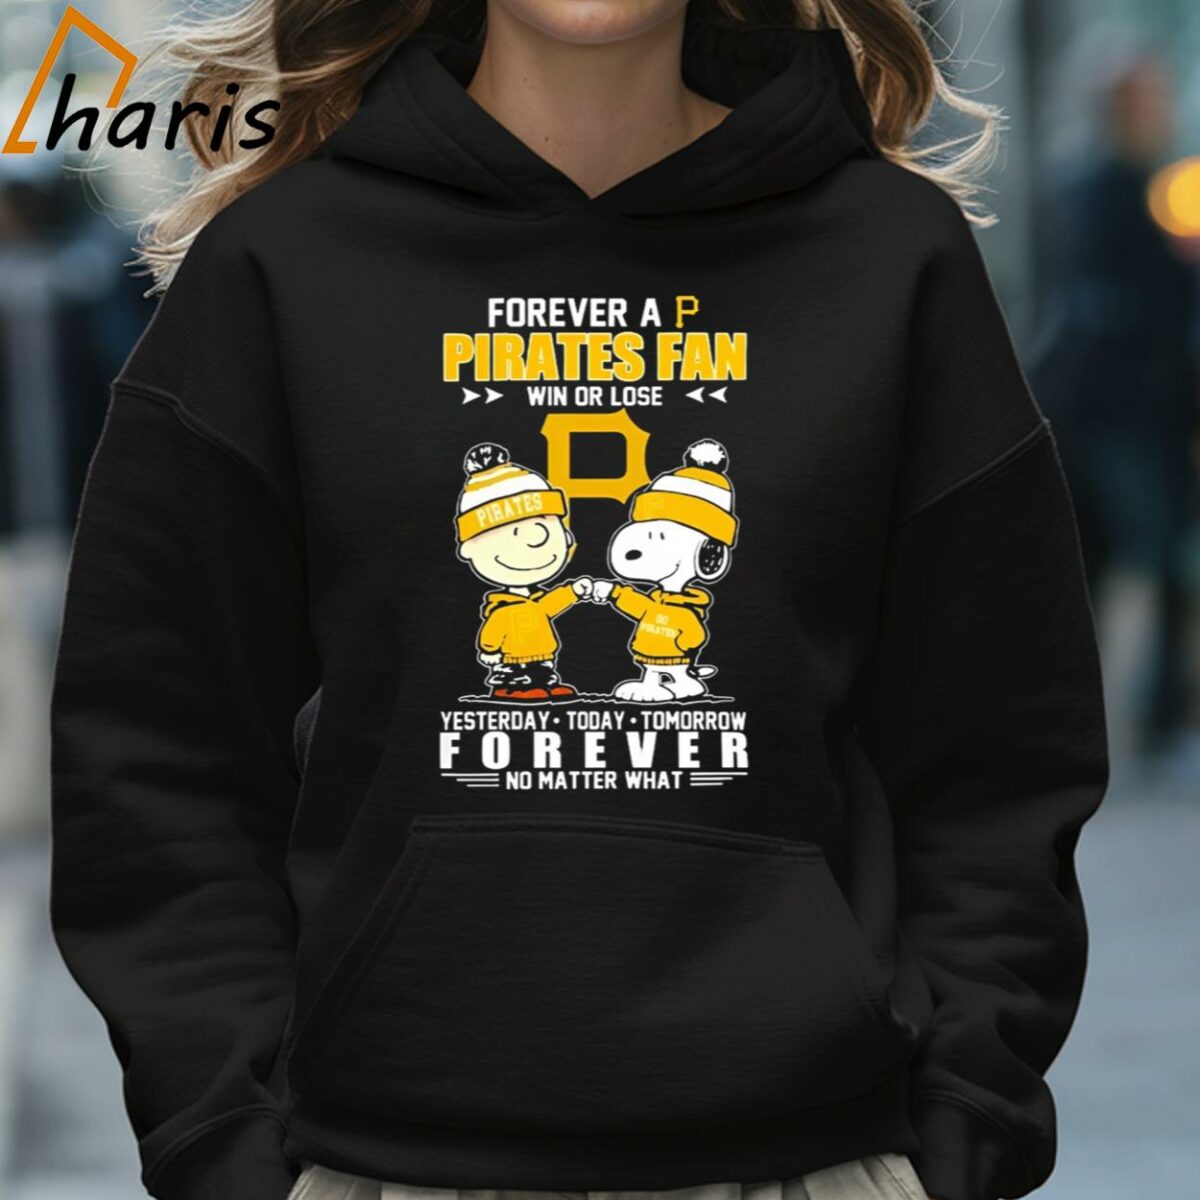 Snoopy And Charlie Brown Forever A Pirates Fan Win Or Lose Yesterday Today Tomorrow Forever No Matter What Shirt 5 Hoodie